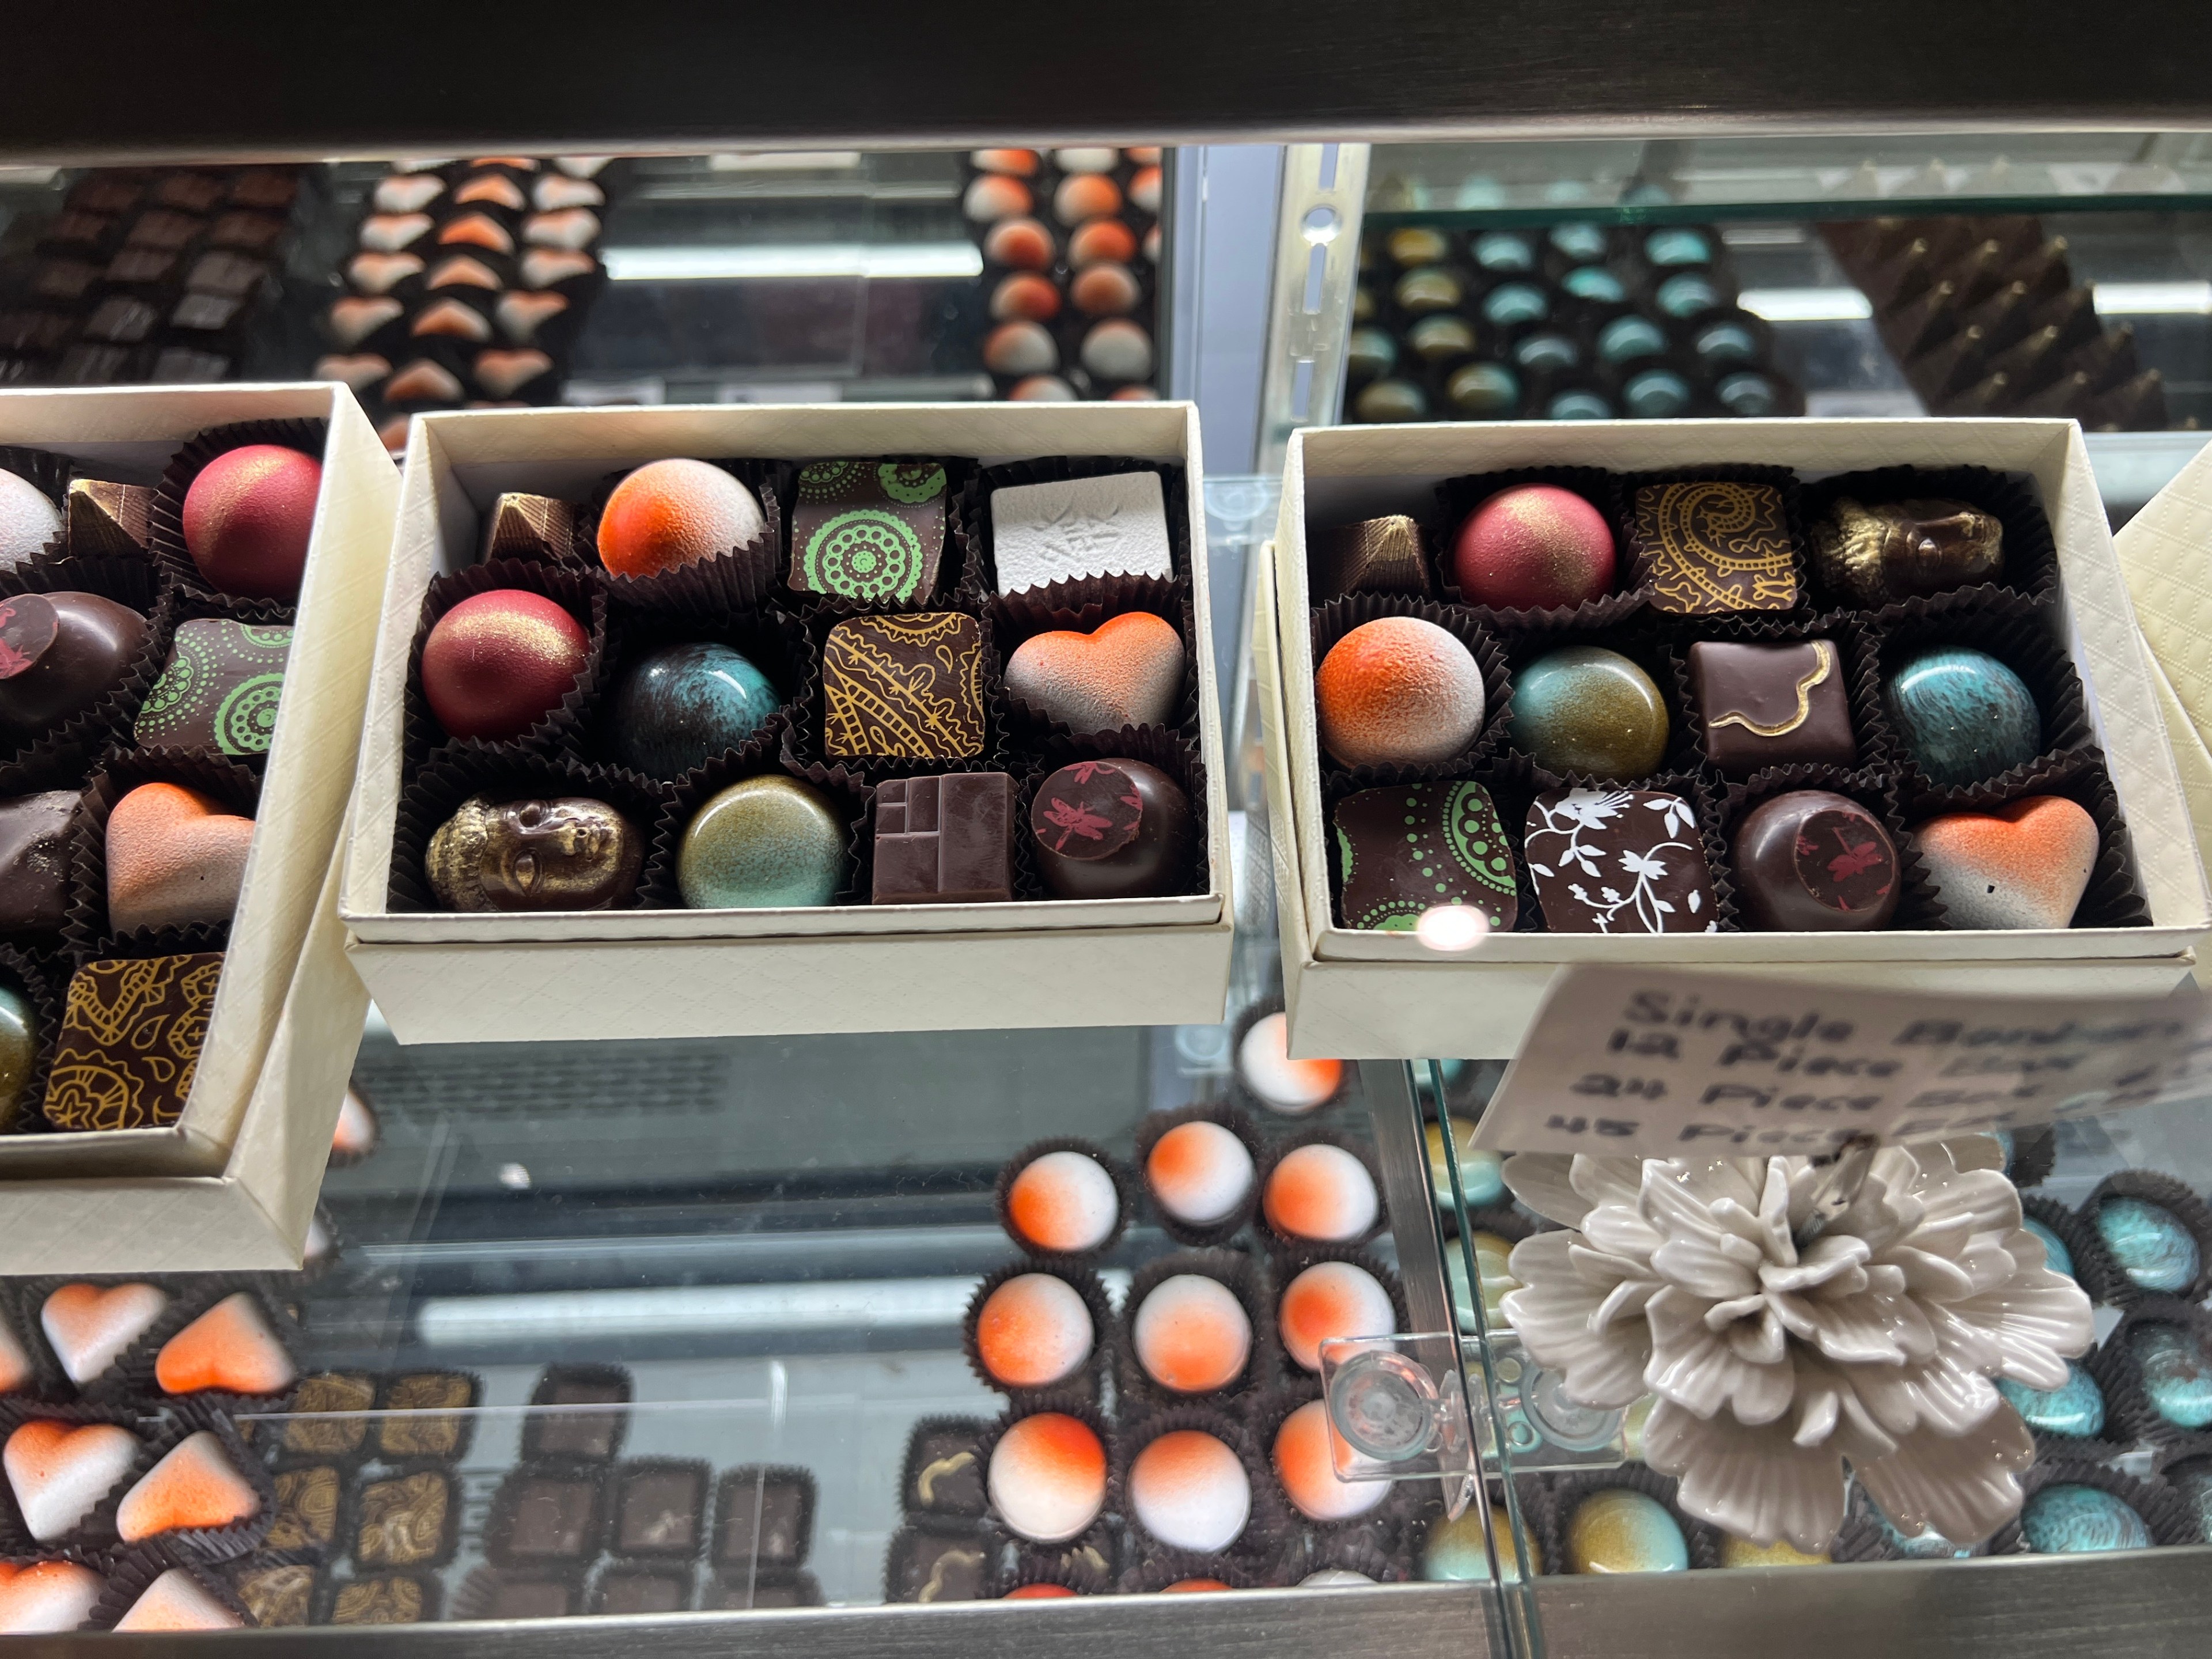 Pieces of chocolates in colors ranging from orange to blue and with different patterns are visible through a glass display case.